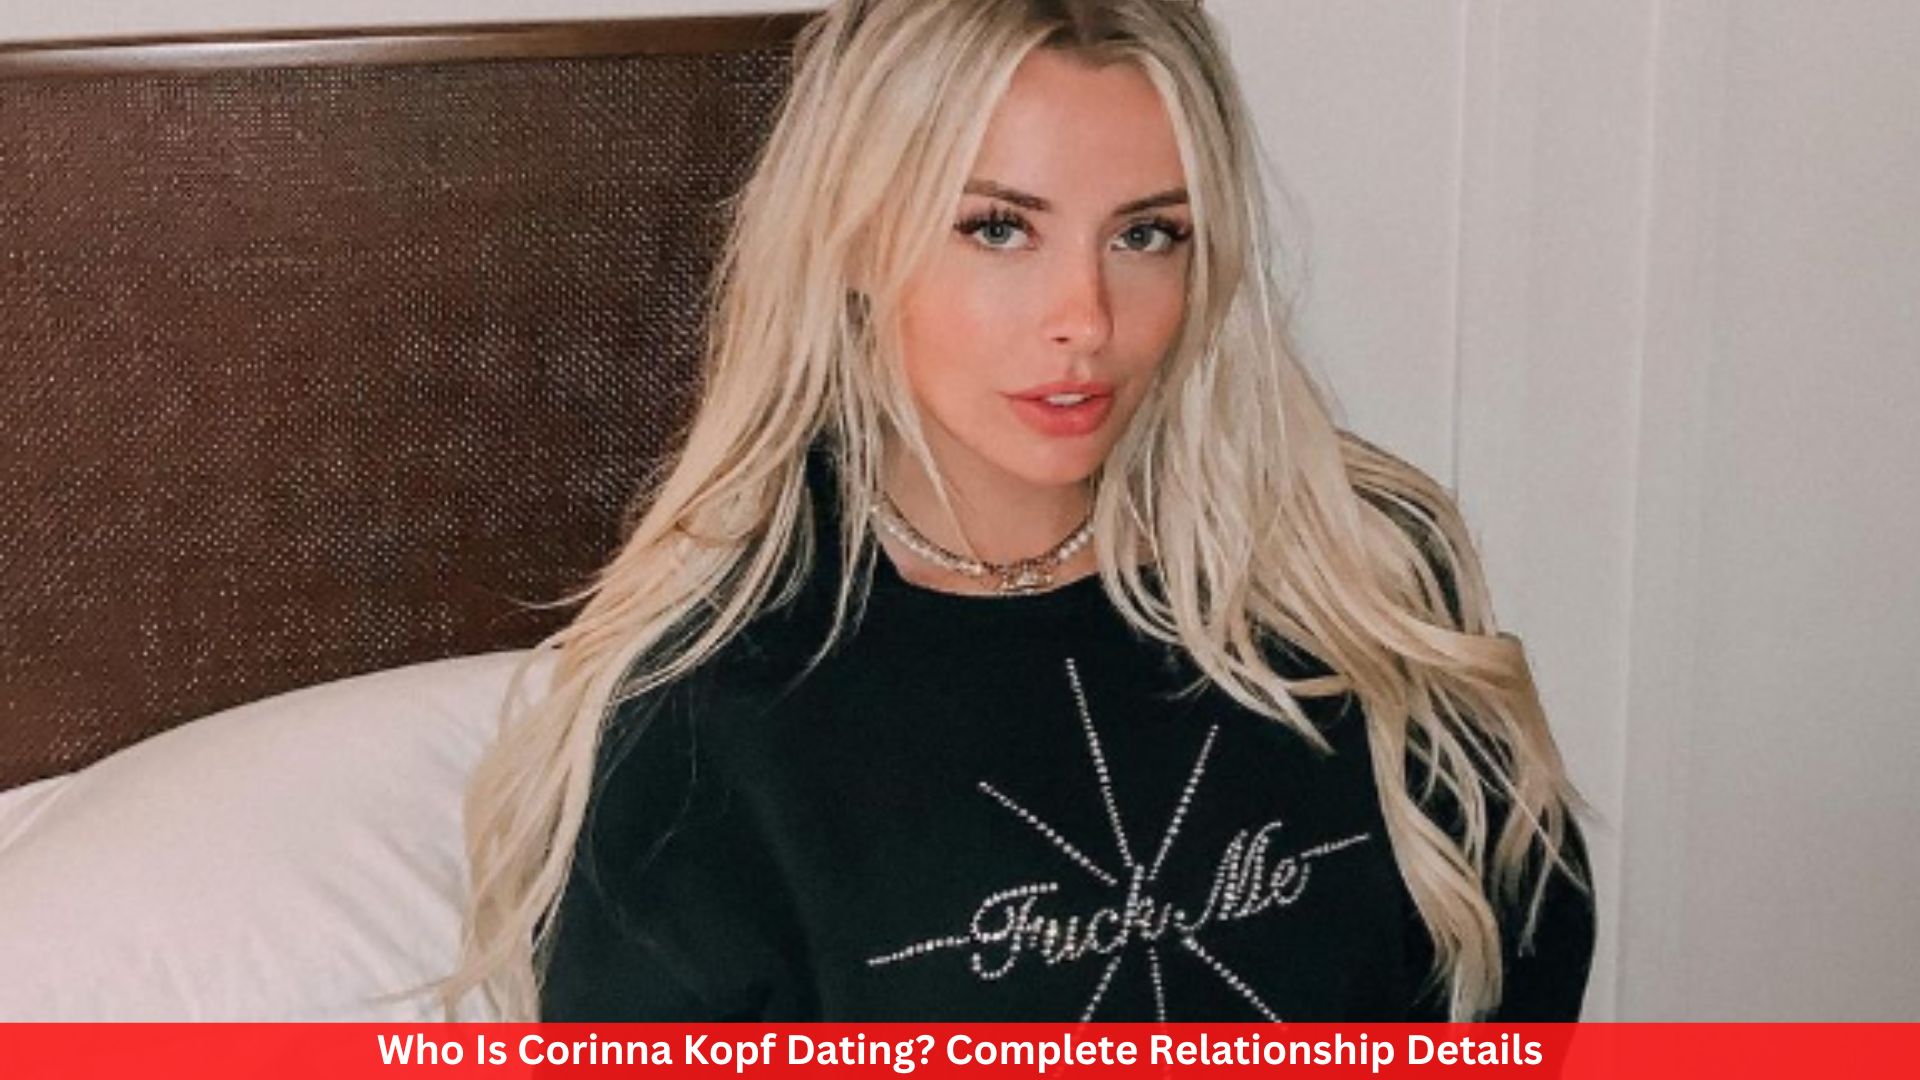 Who Is Corinna Kopf Dating? Complete Relationship Details